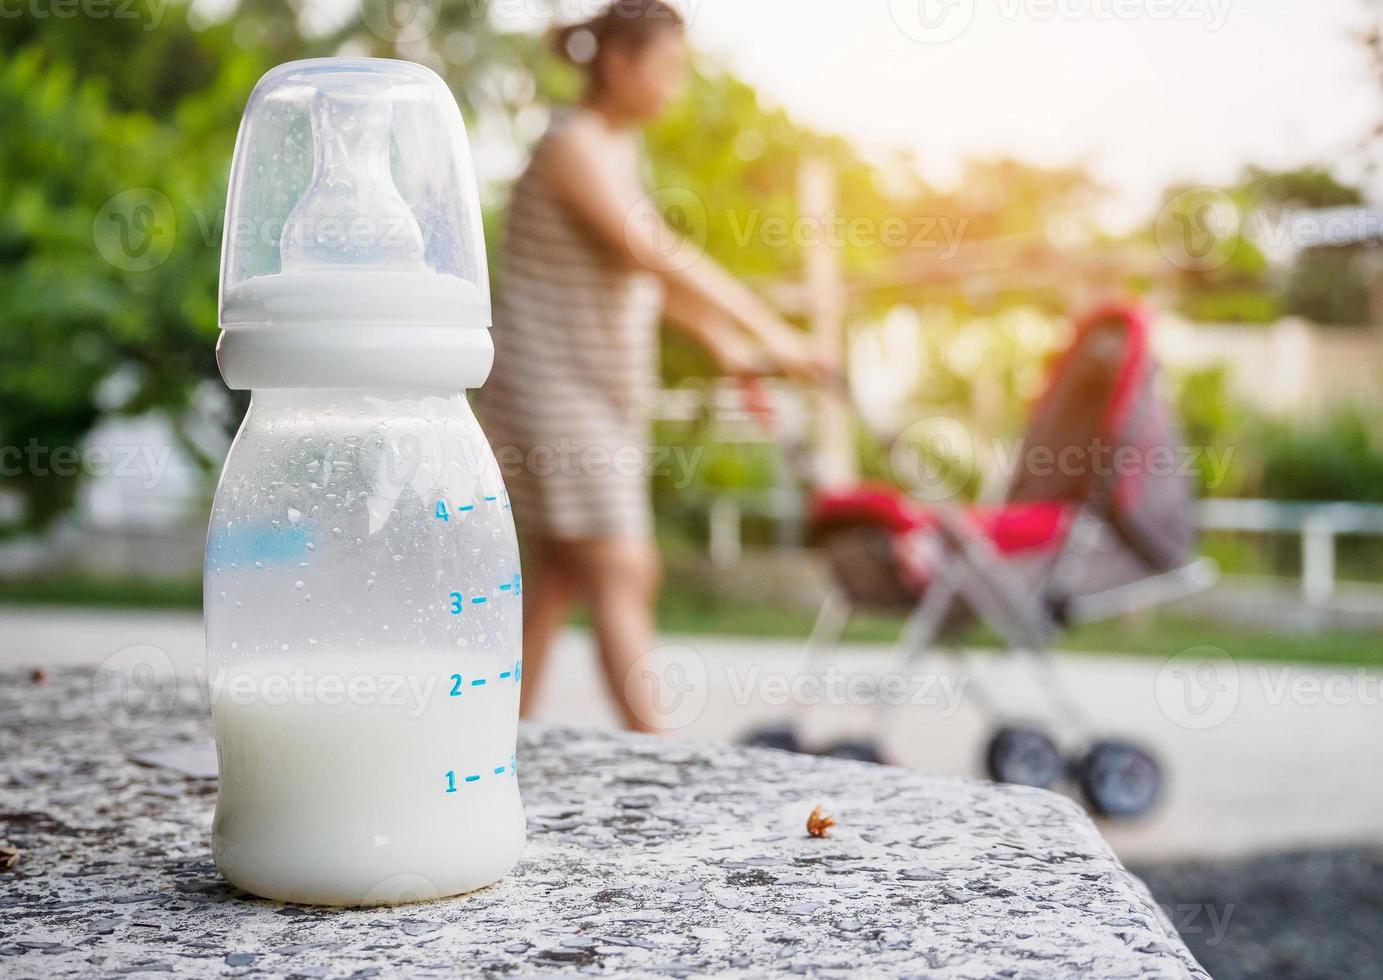 baby milk bottle on stone table over Mother with baby carriage background photo